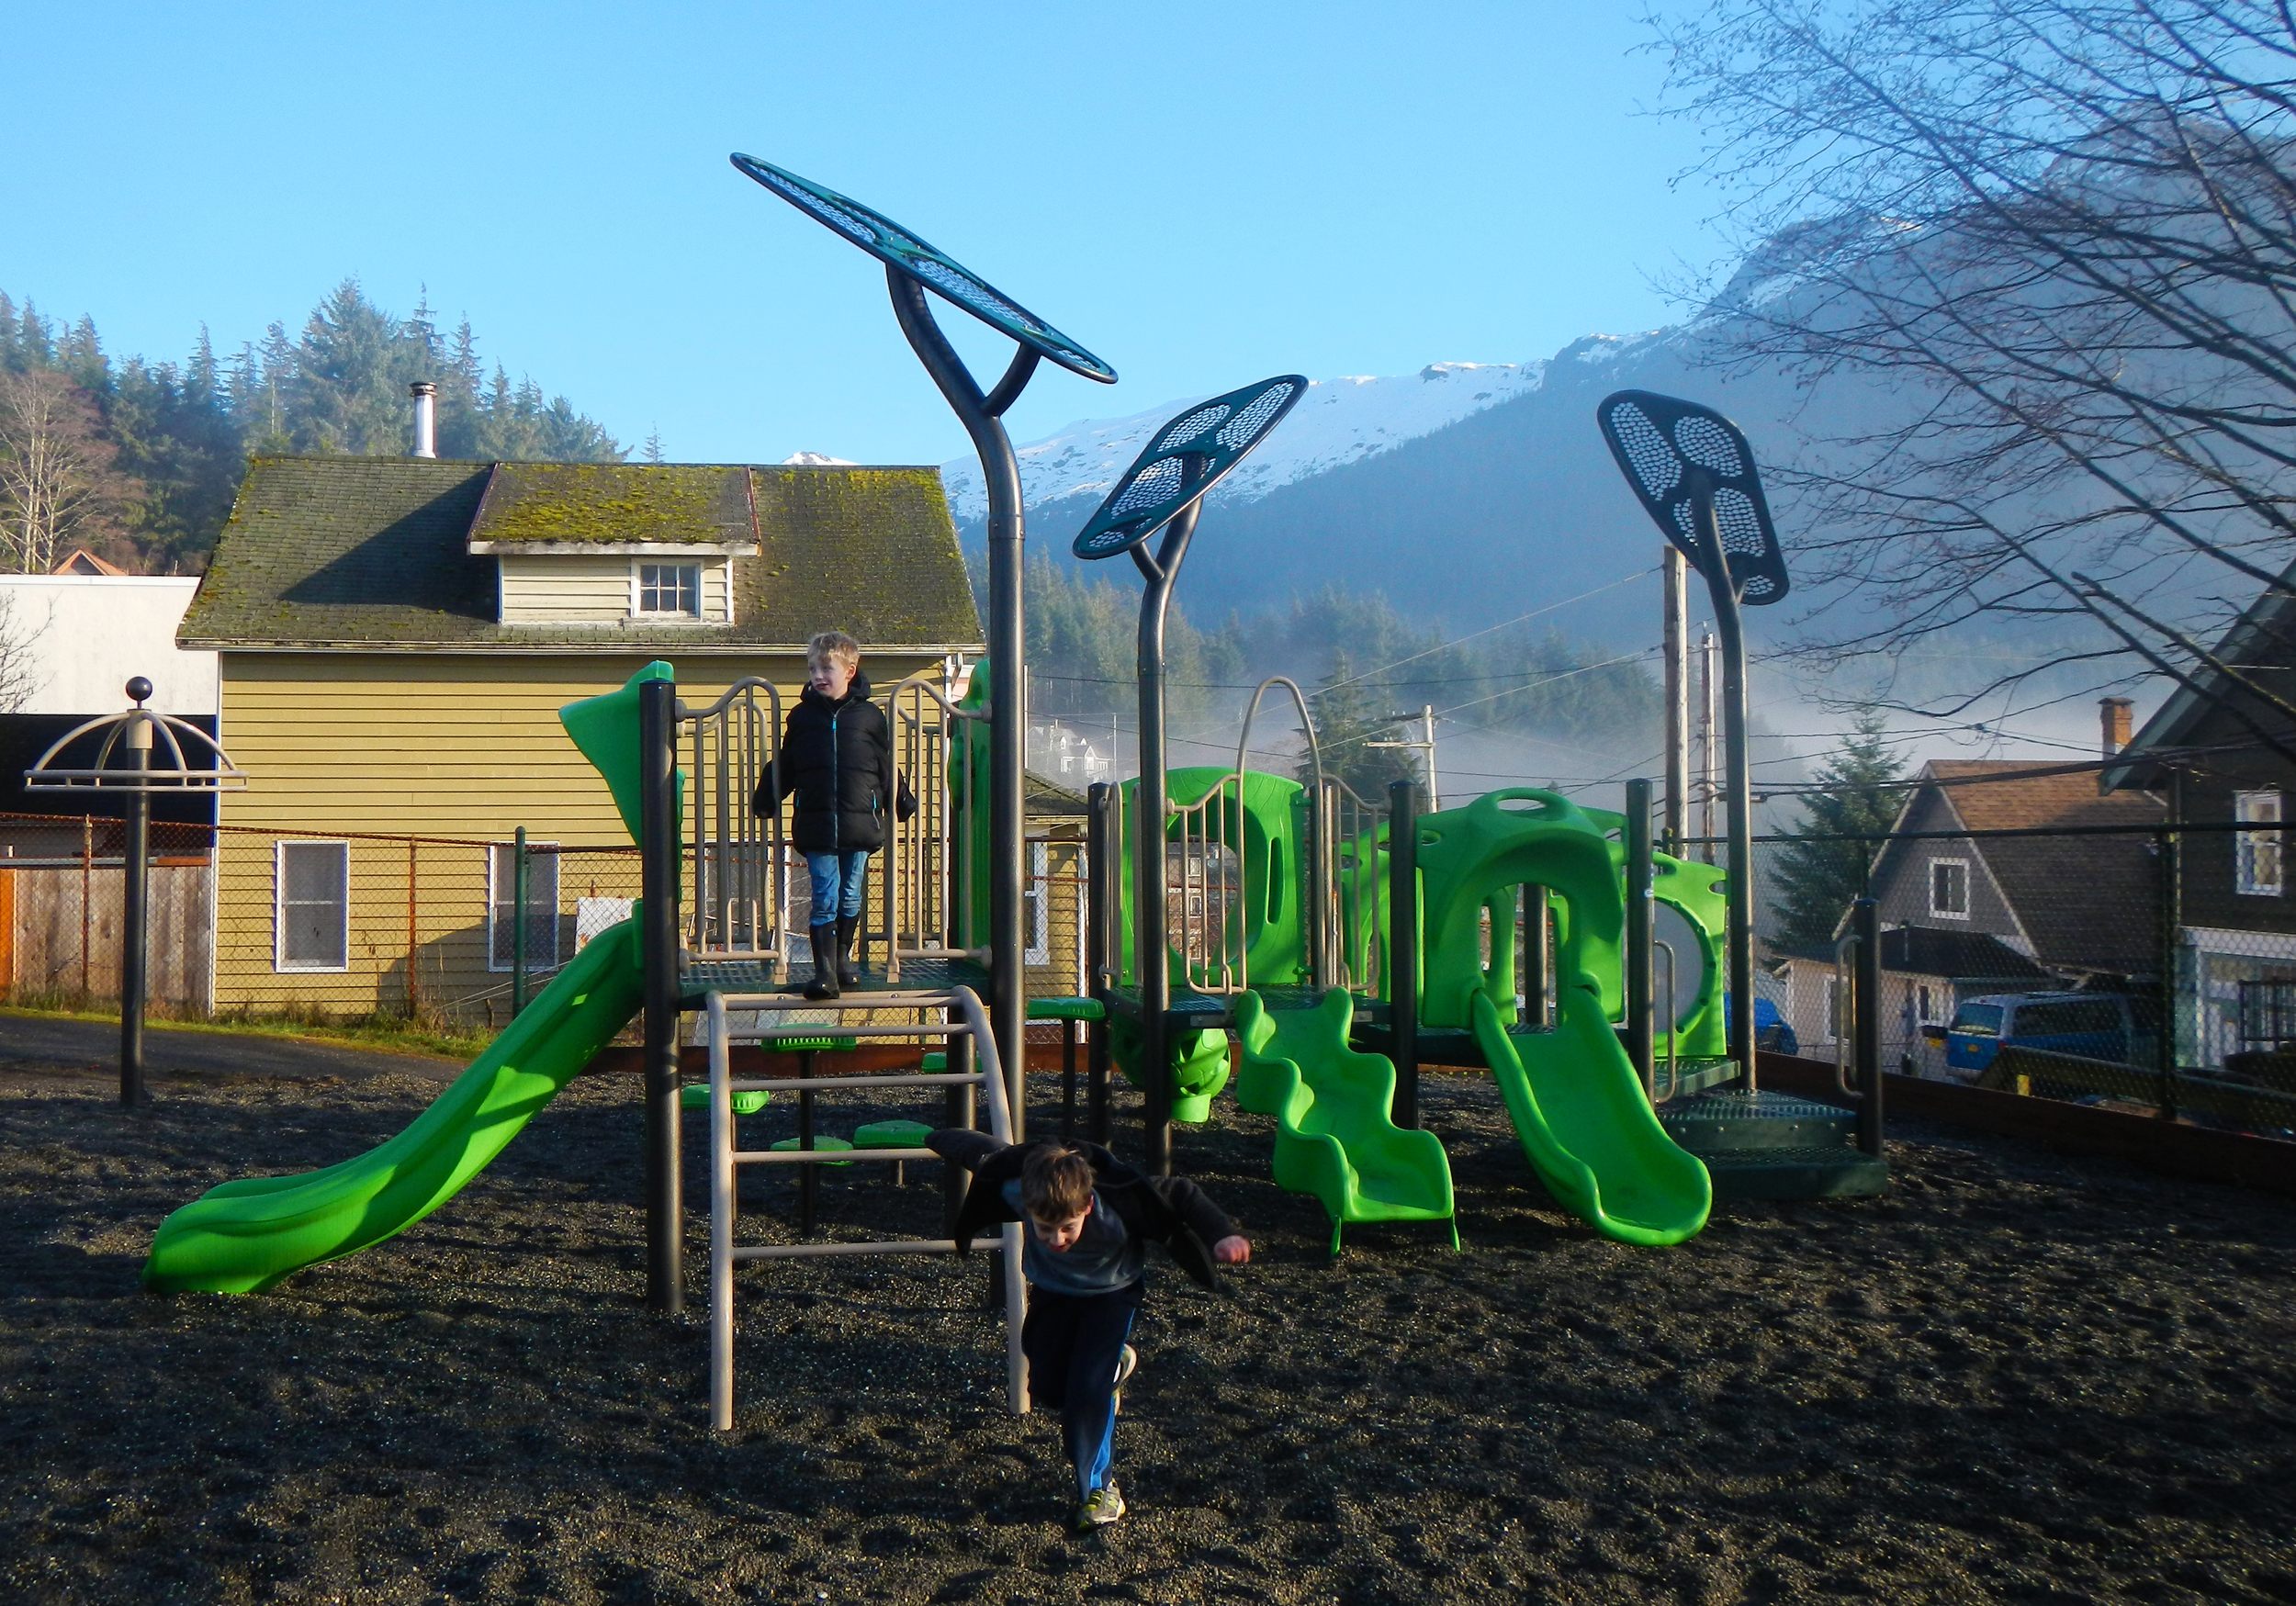  Grant Street Playground, just up the hill from the Cruise Ship dock in Ketchikan. 